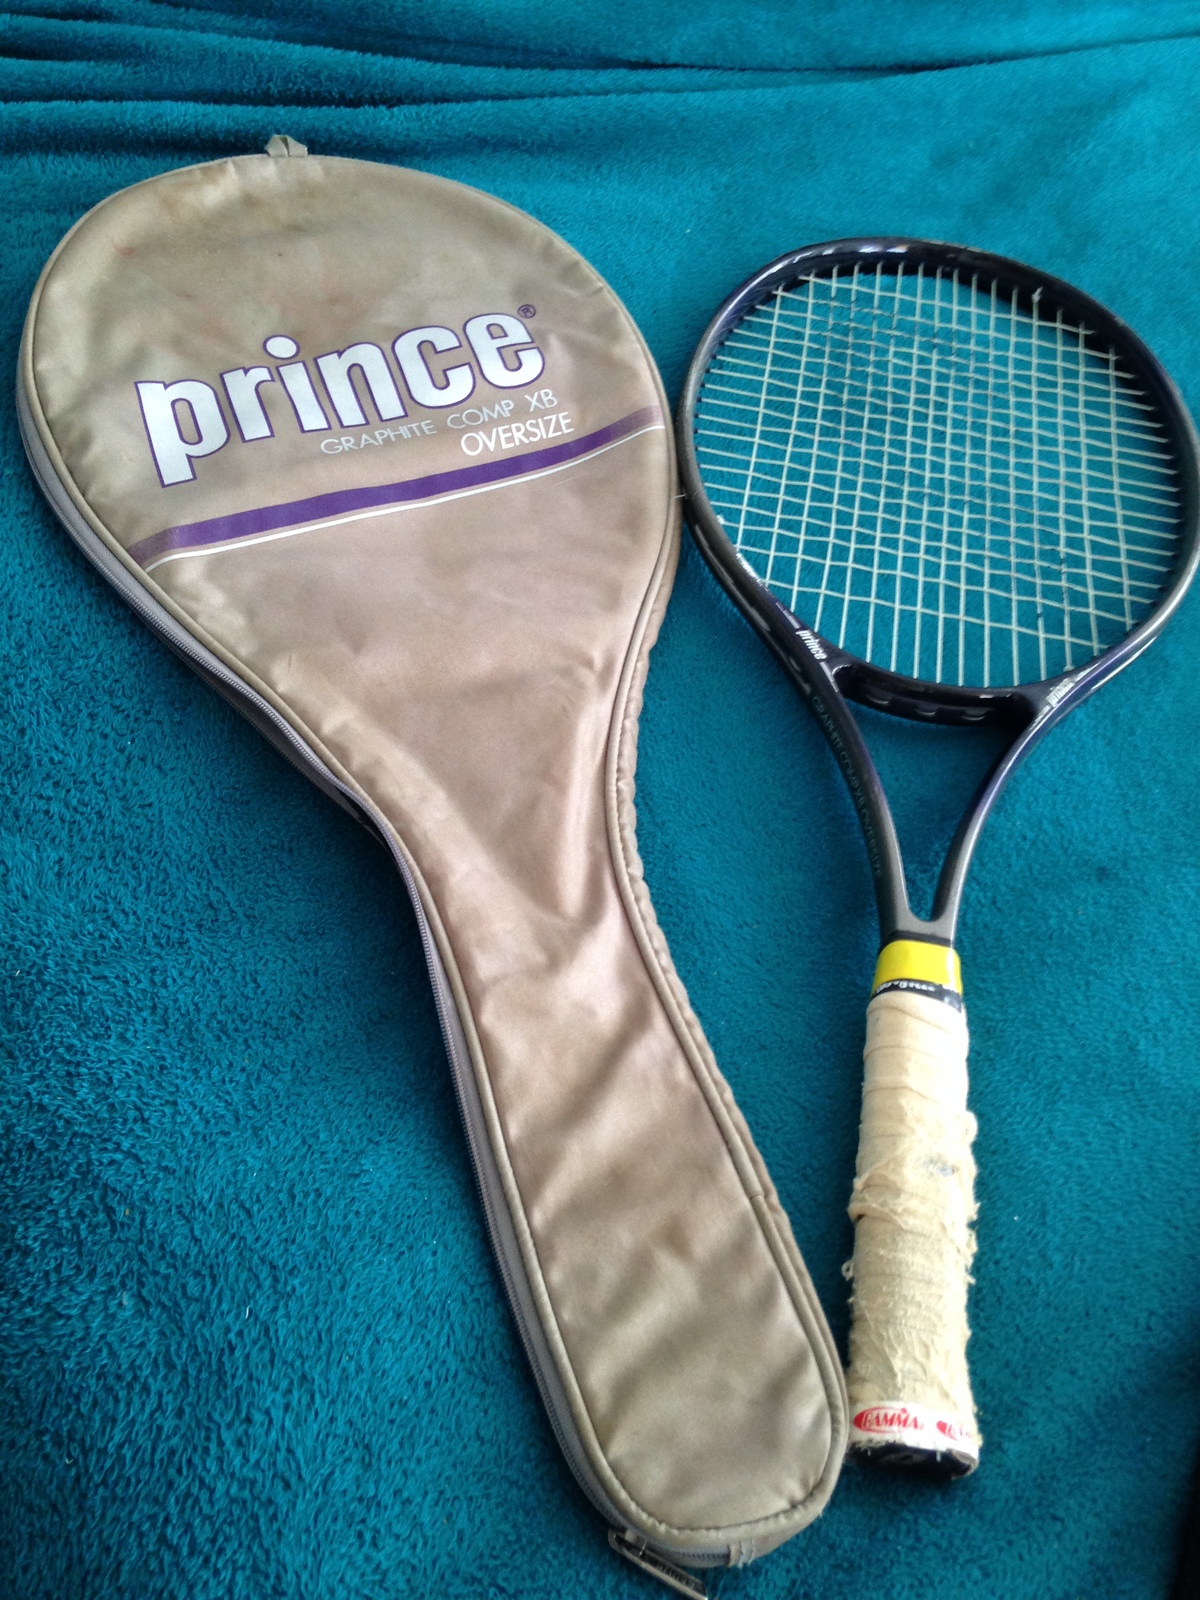 prince graphite compxb oversized tennis and 50 similar items